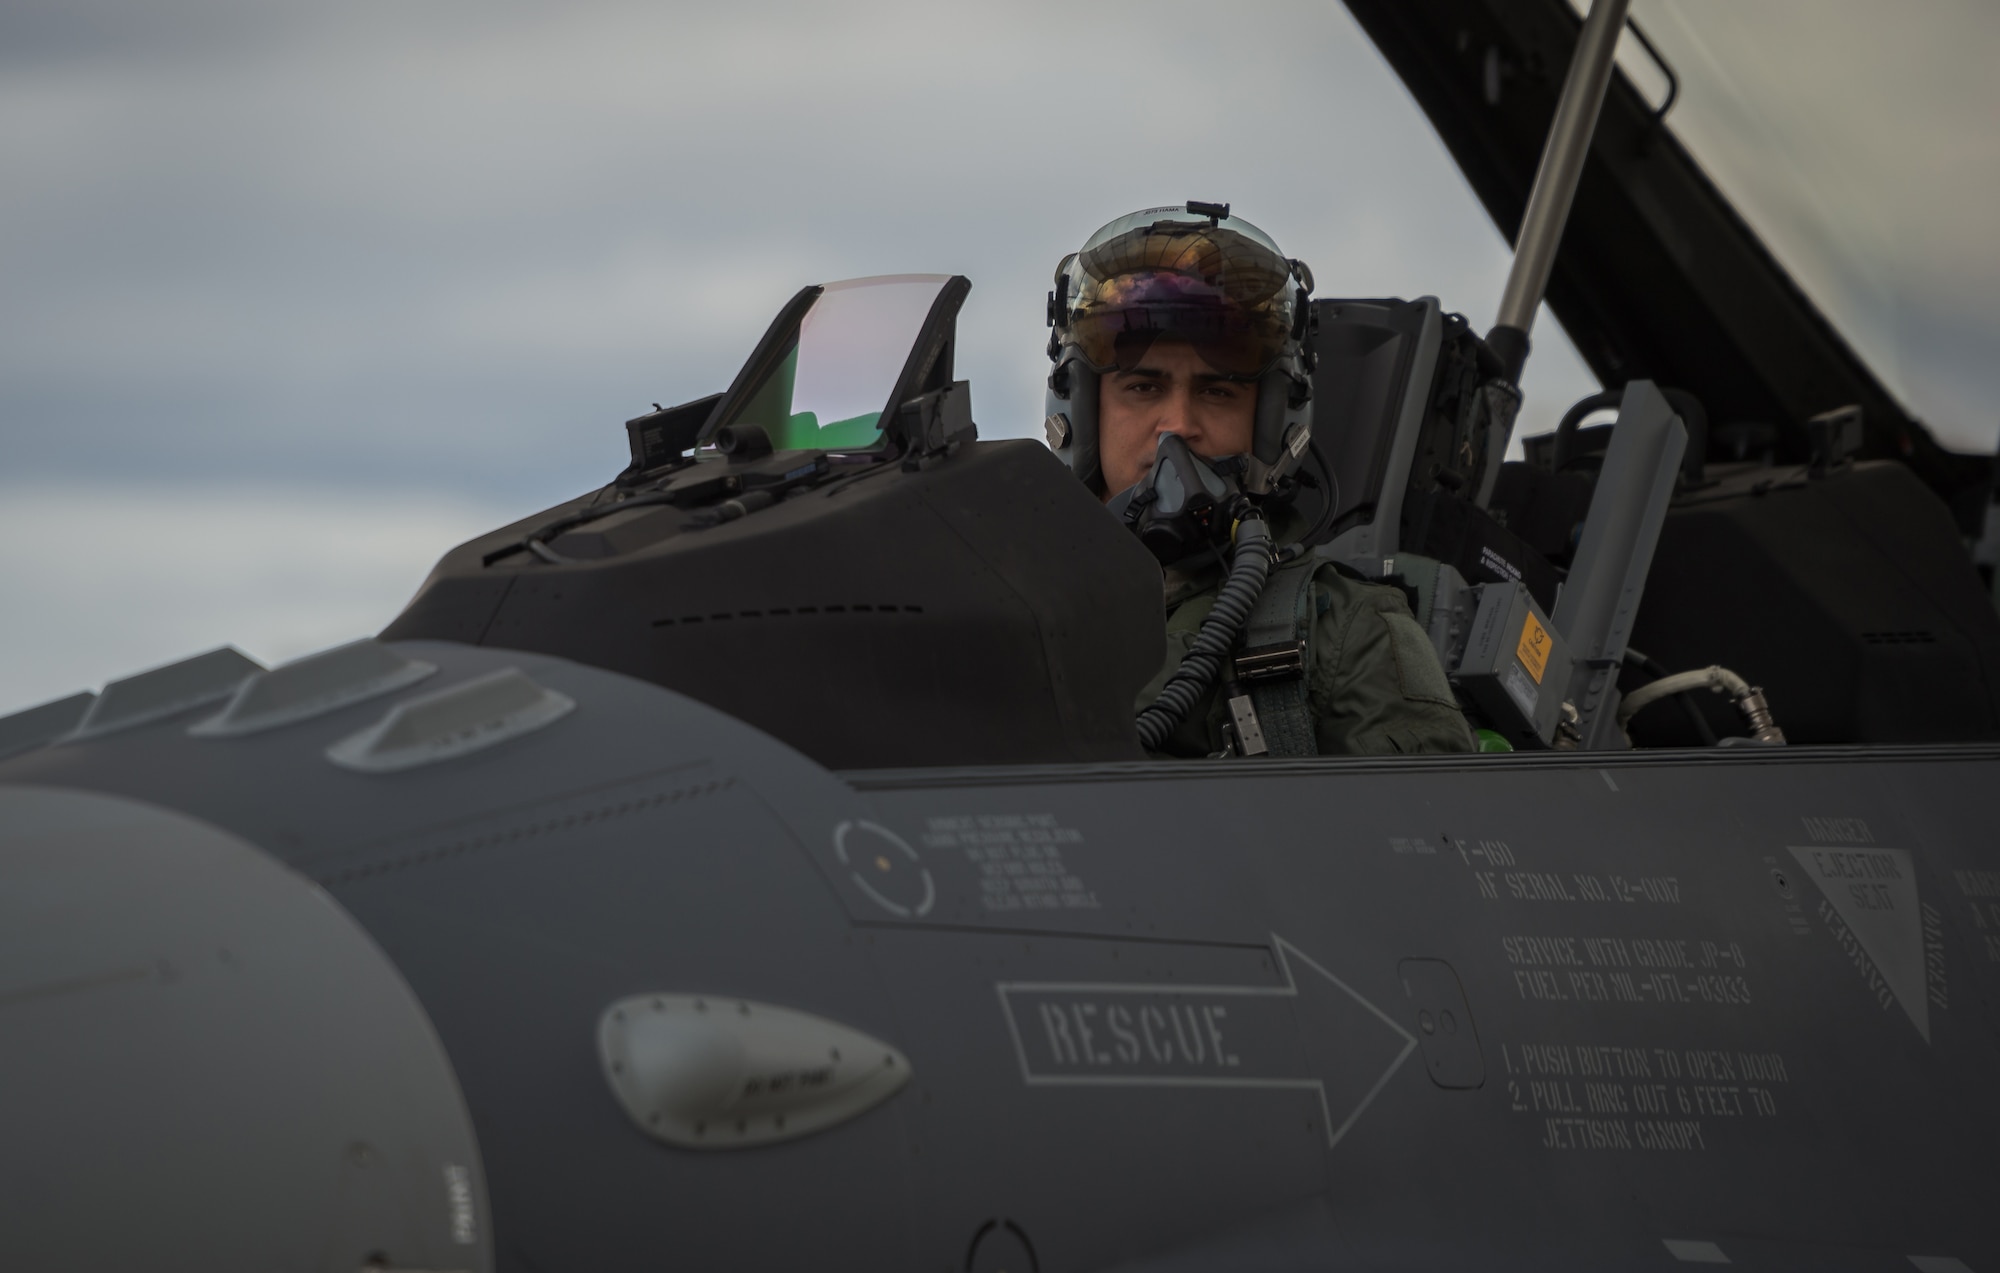 Iraqi air force captain Hama conducts preflight inspections while inside a new to service Iraqi F-16 Fighting Falcon Dec. 17, 2014, located at the nearby Tucson International Airport, Ariz. Hama was part of the first class of Iraqi students training with the 162nd Wing to further enhance interoperability between the two partner nations. (U.S. Air Force photo/Senior Airman Jordan Castelan)